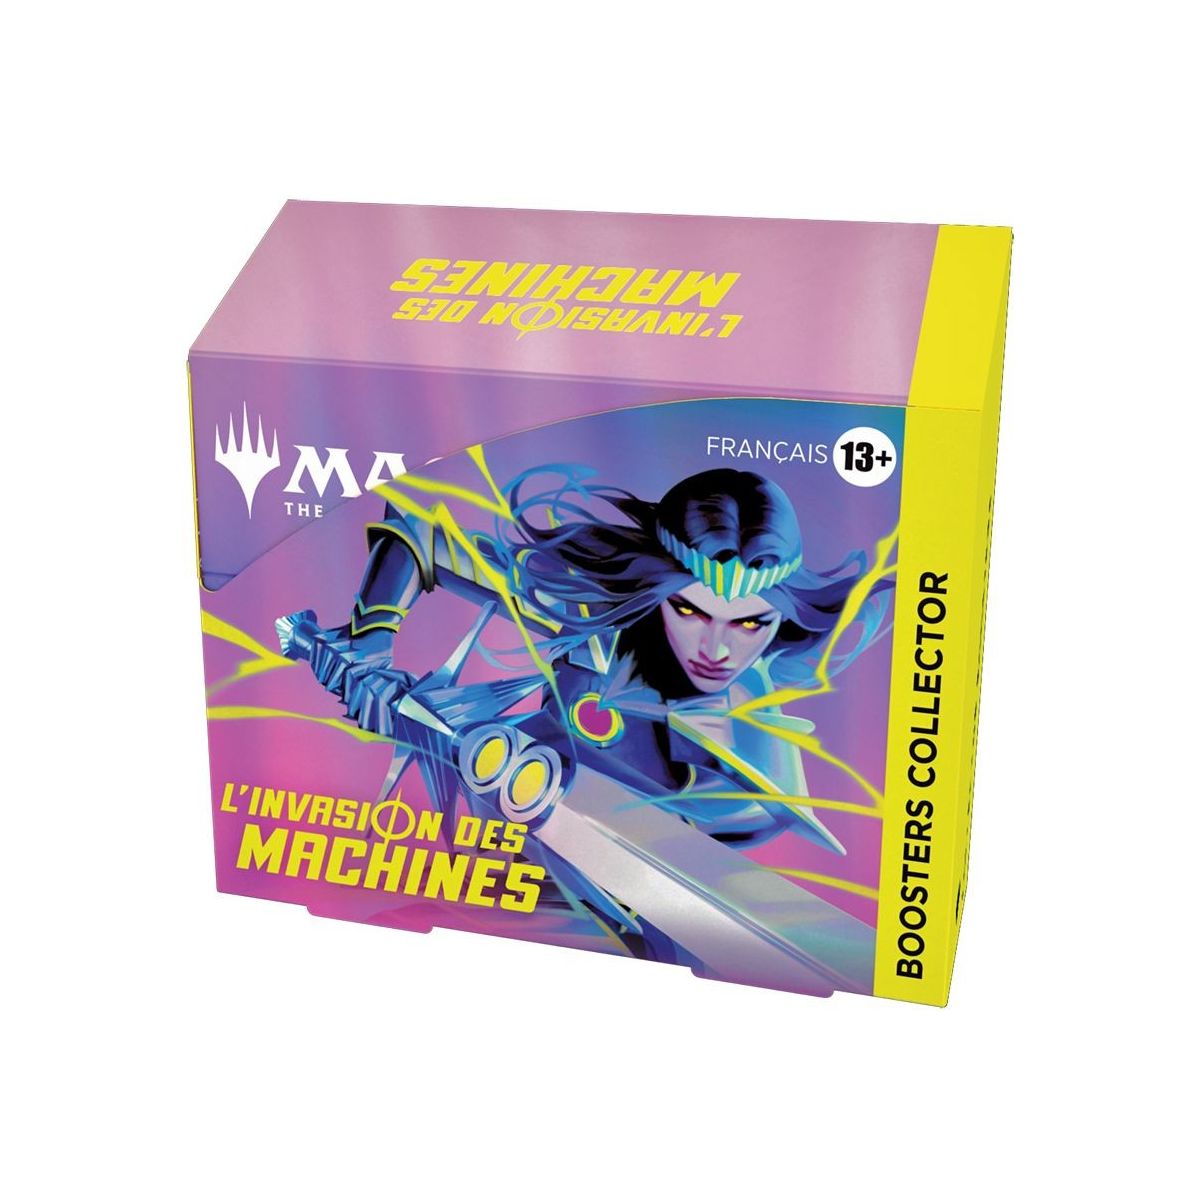 Item MTG - Booster Box - Collector - Invasion of the Machines - FR